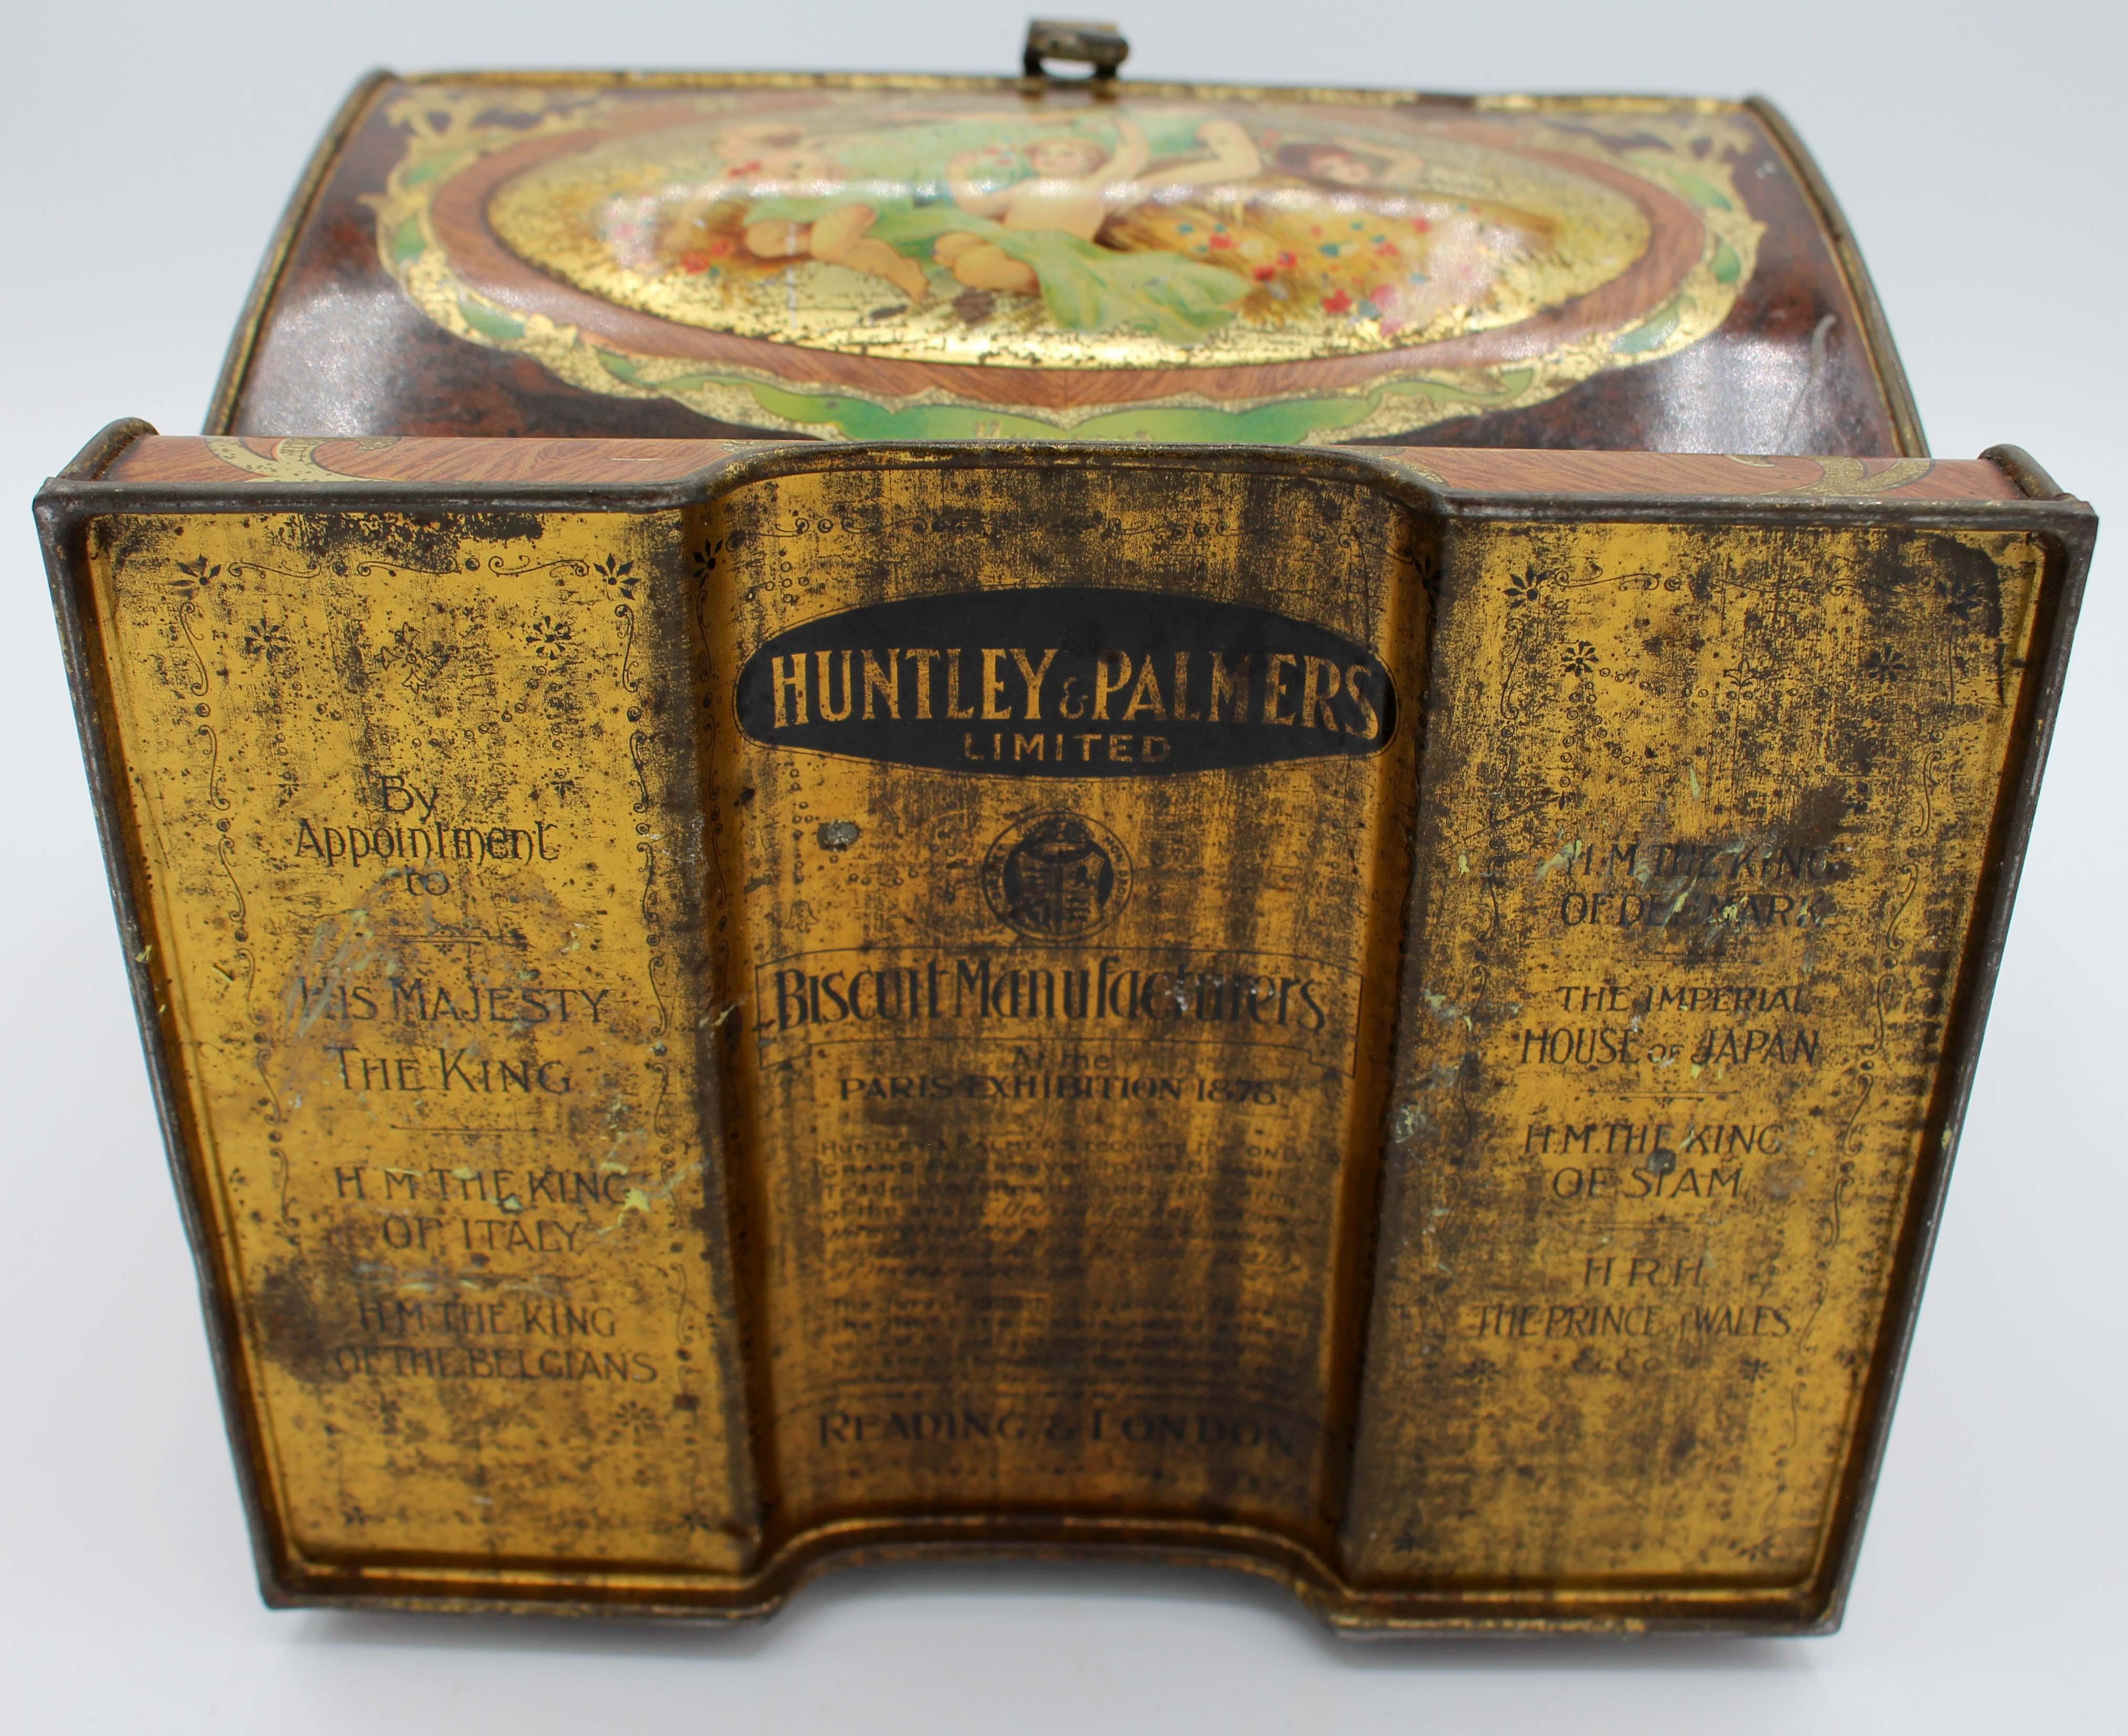 1906 Art Nouveau Biscuit Tin by Huntley & Palmers For Sale 5